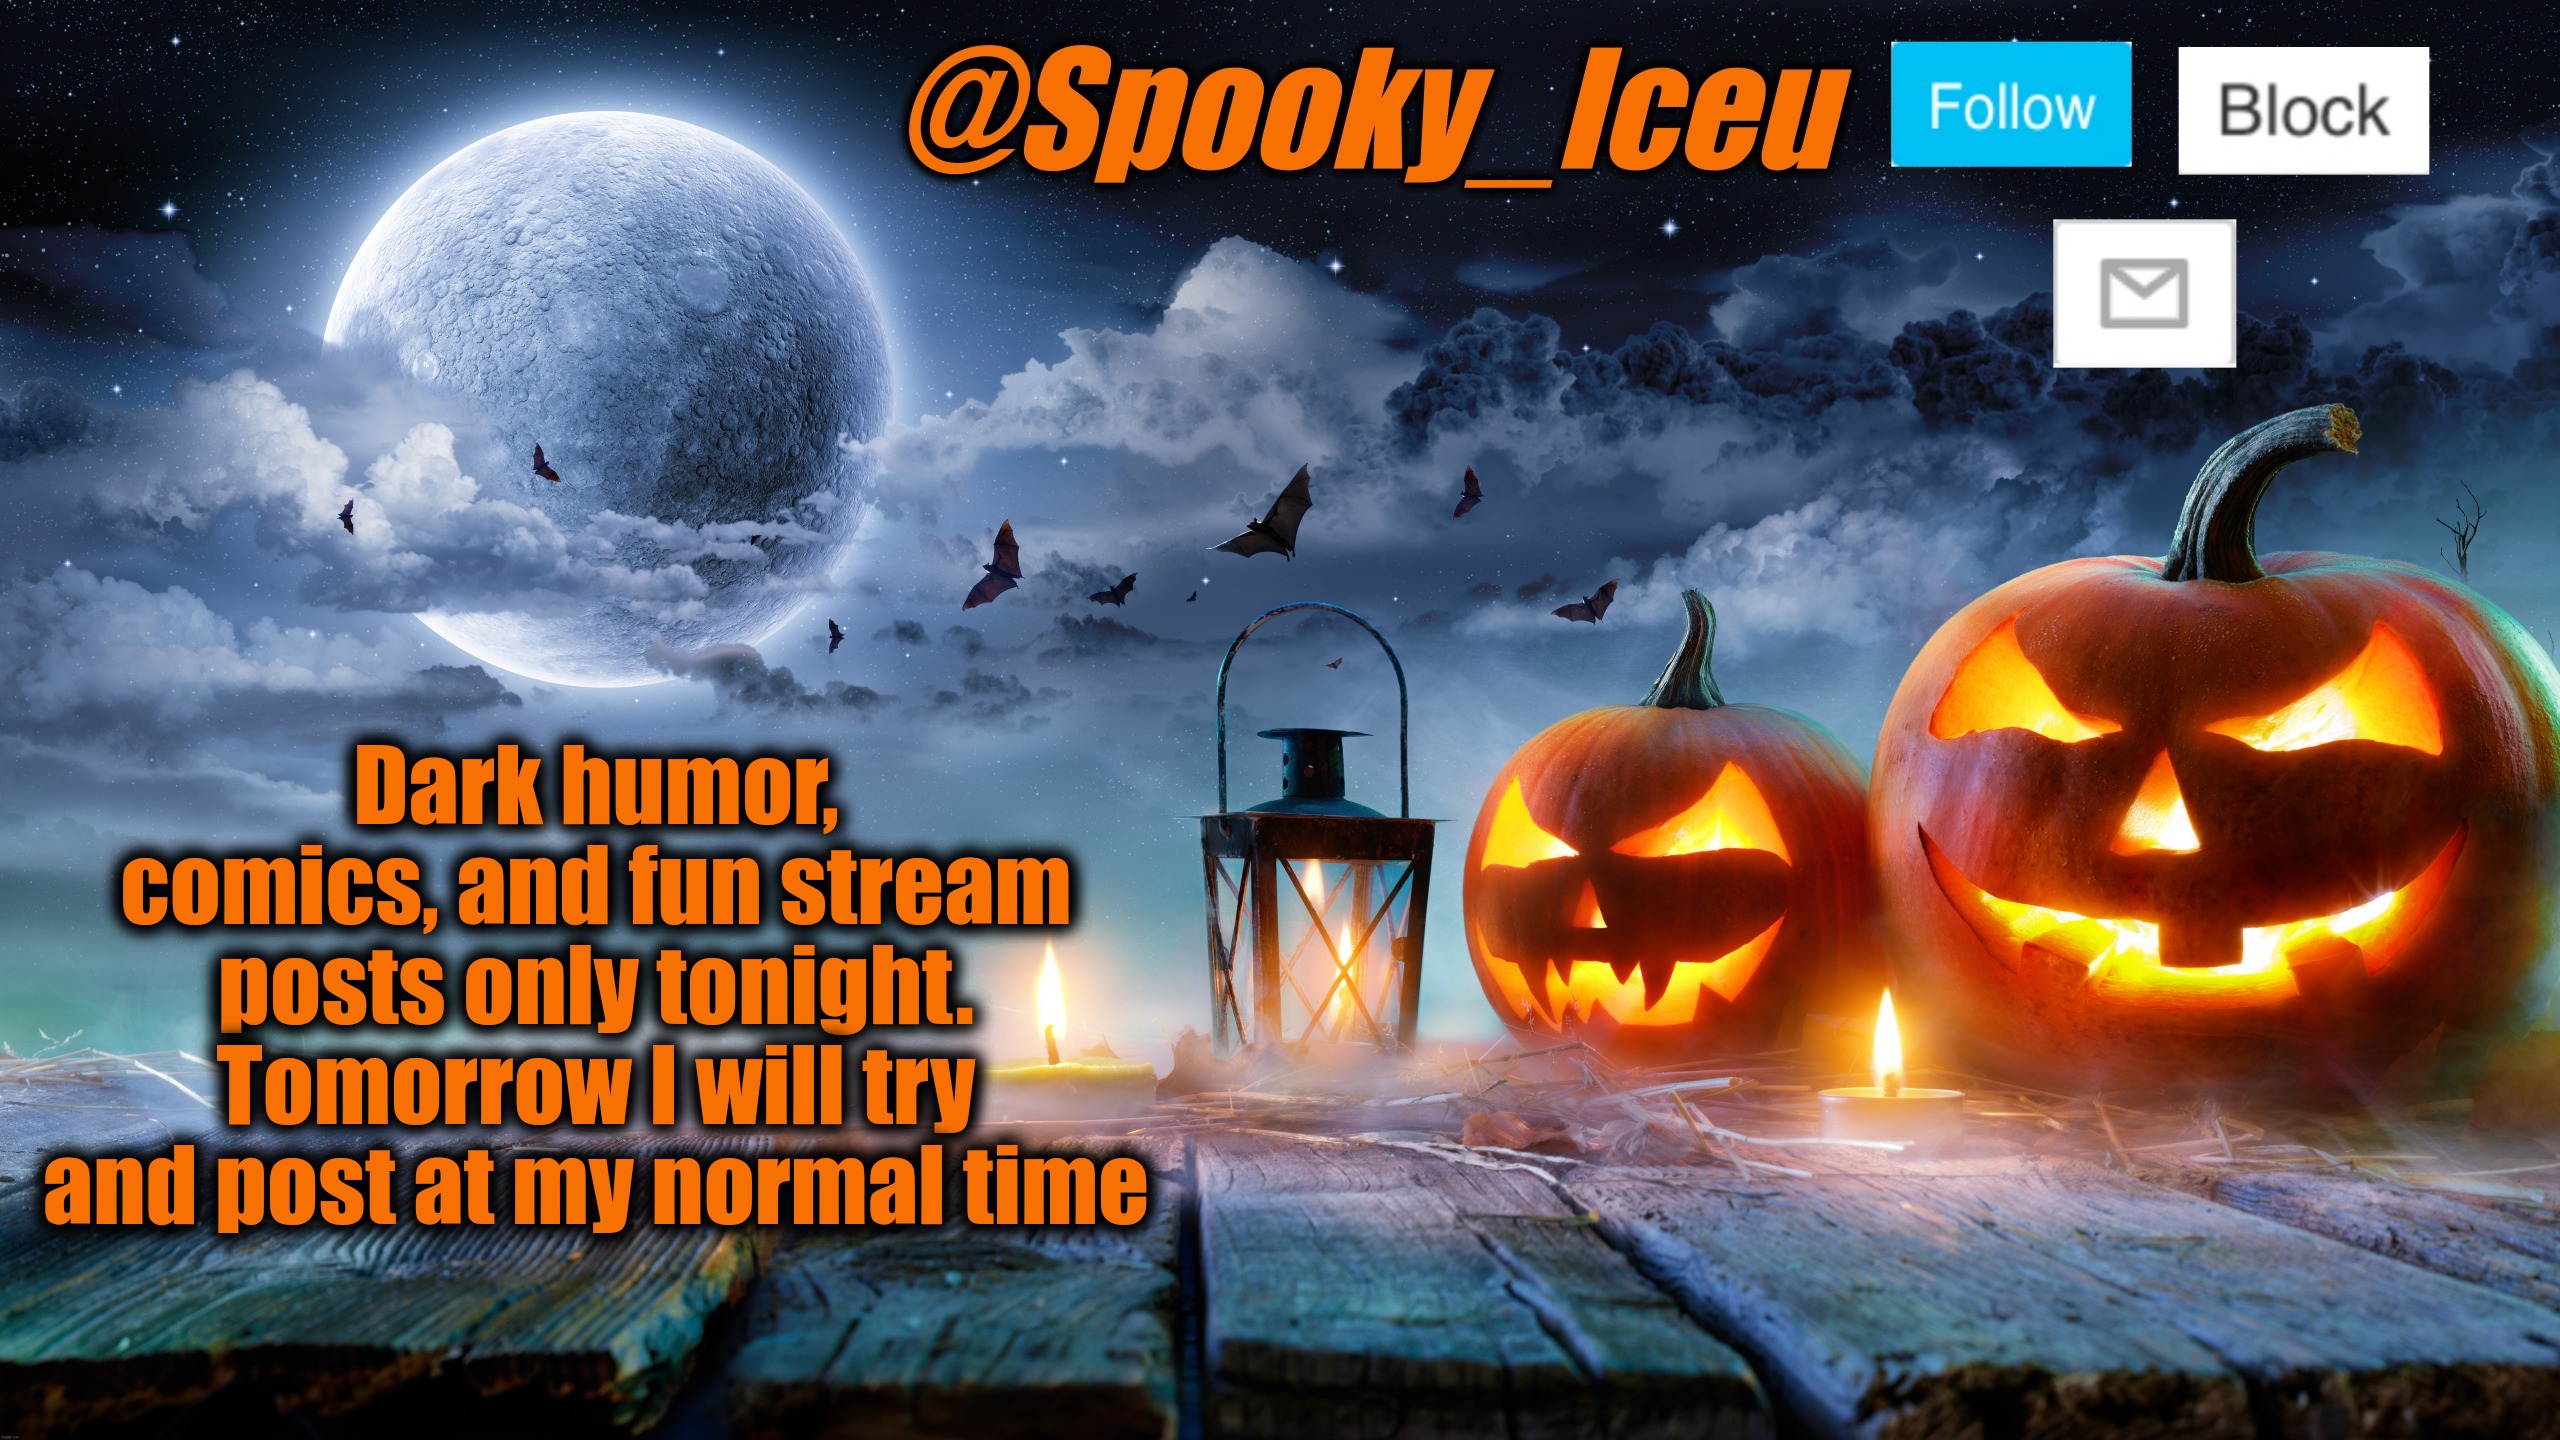 Iceu Spooky Halloween Template 2023 | Dark humor, comics, and fun stream posts only tonight. Tomorrow I will try and post at my normal time | image tagged in iceu spooky halloween template 2023 | made w/ Imgflip meme maker